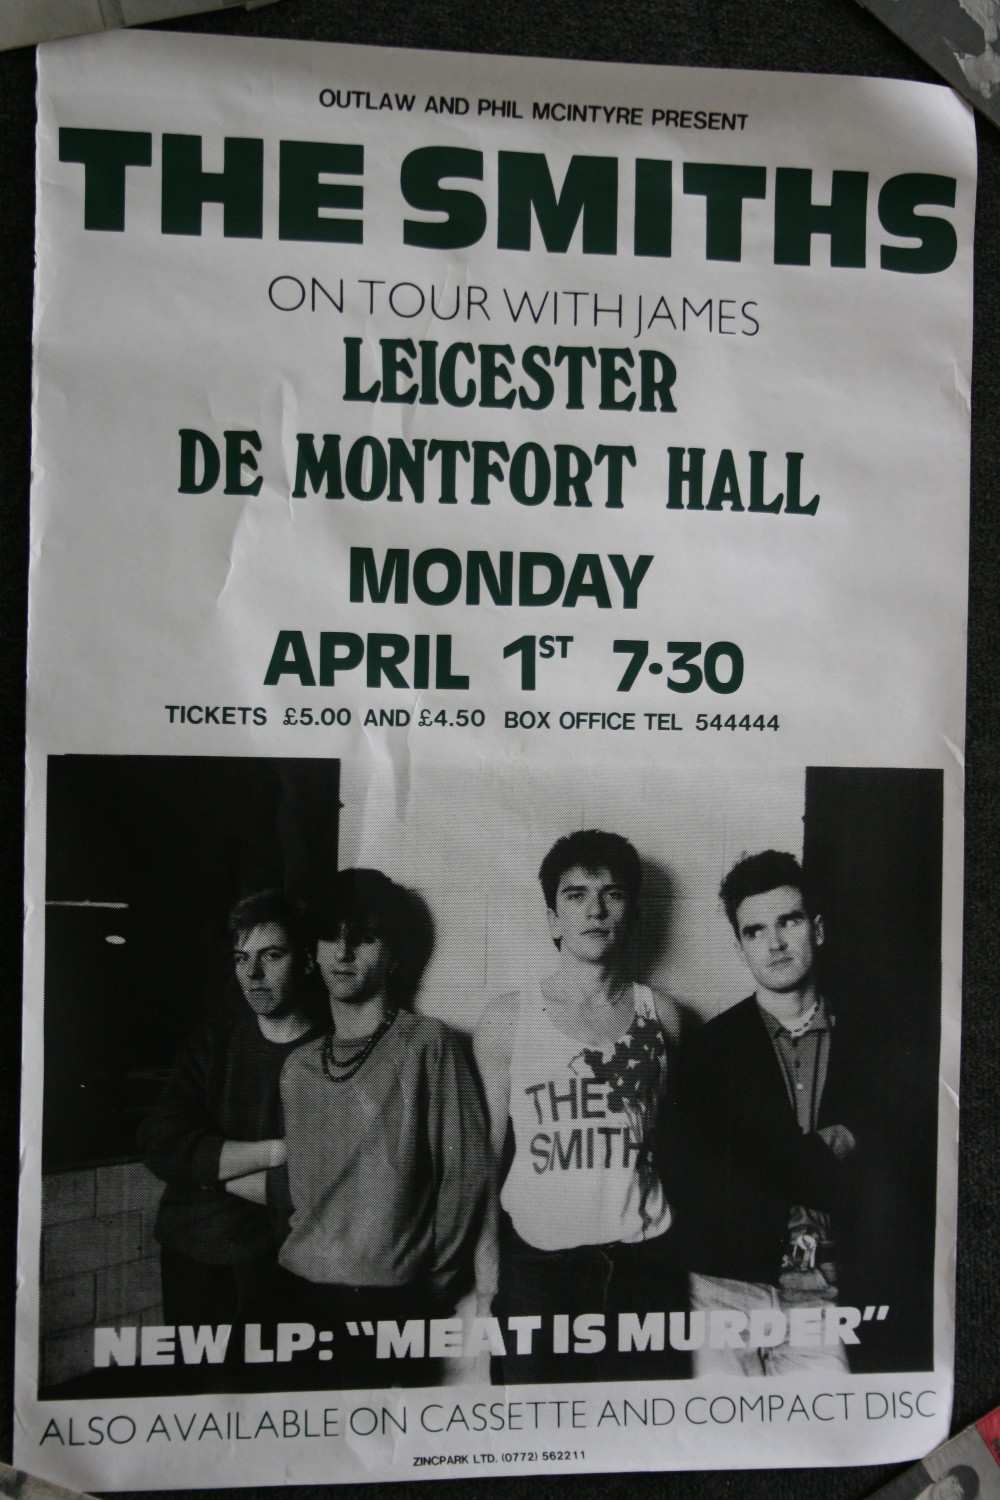 THE SMITHS - original concert poster from their performance at Leicester De Montfort Hall on